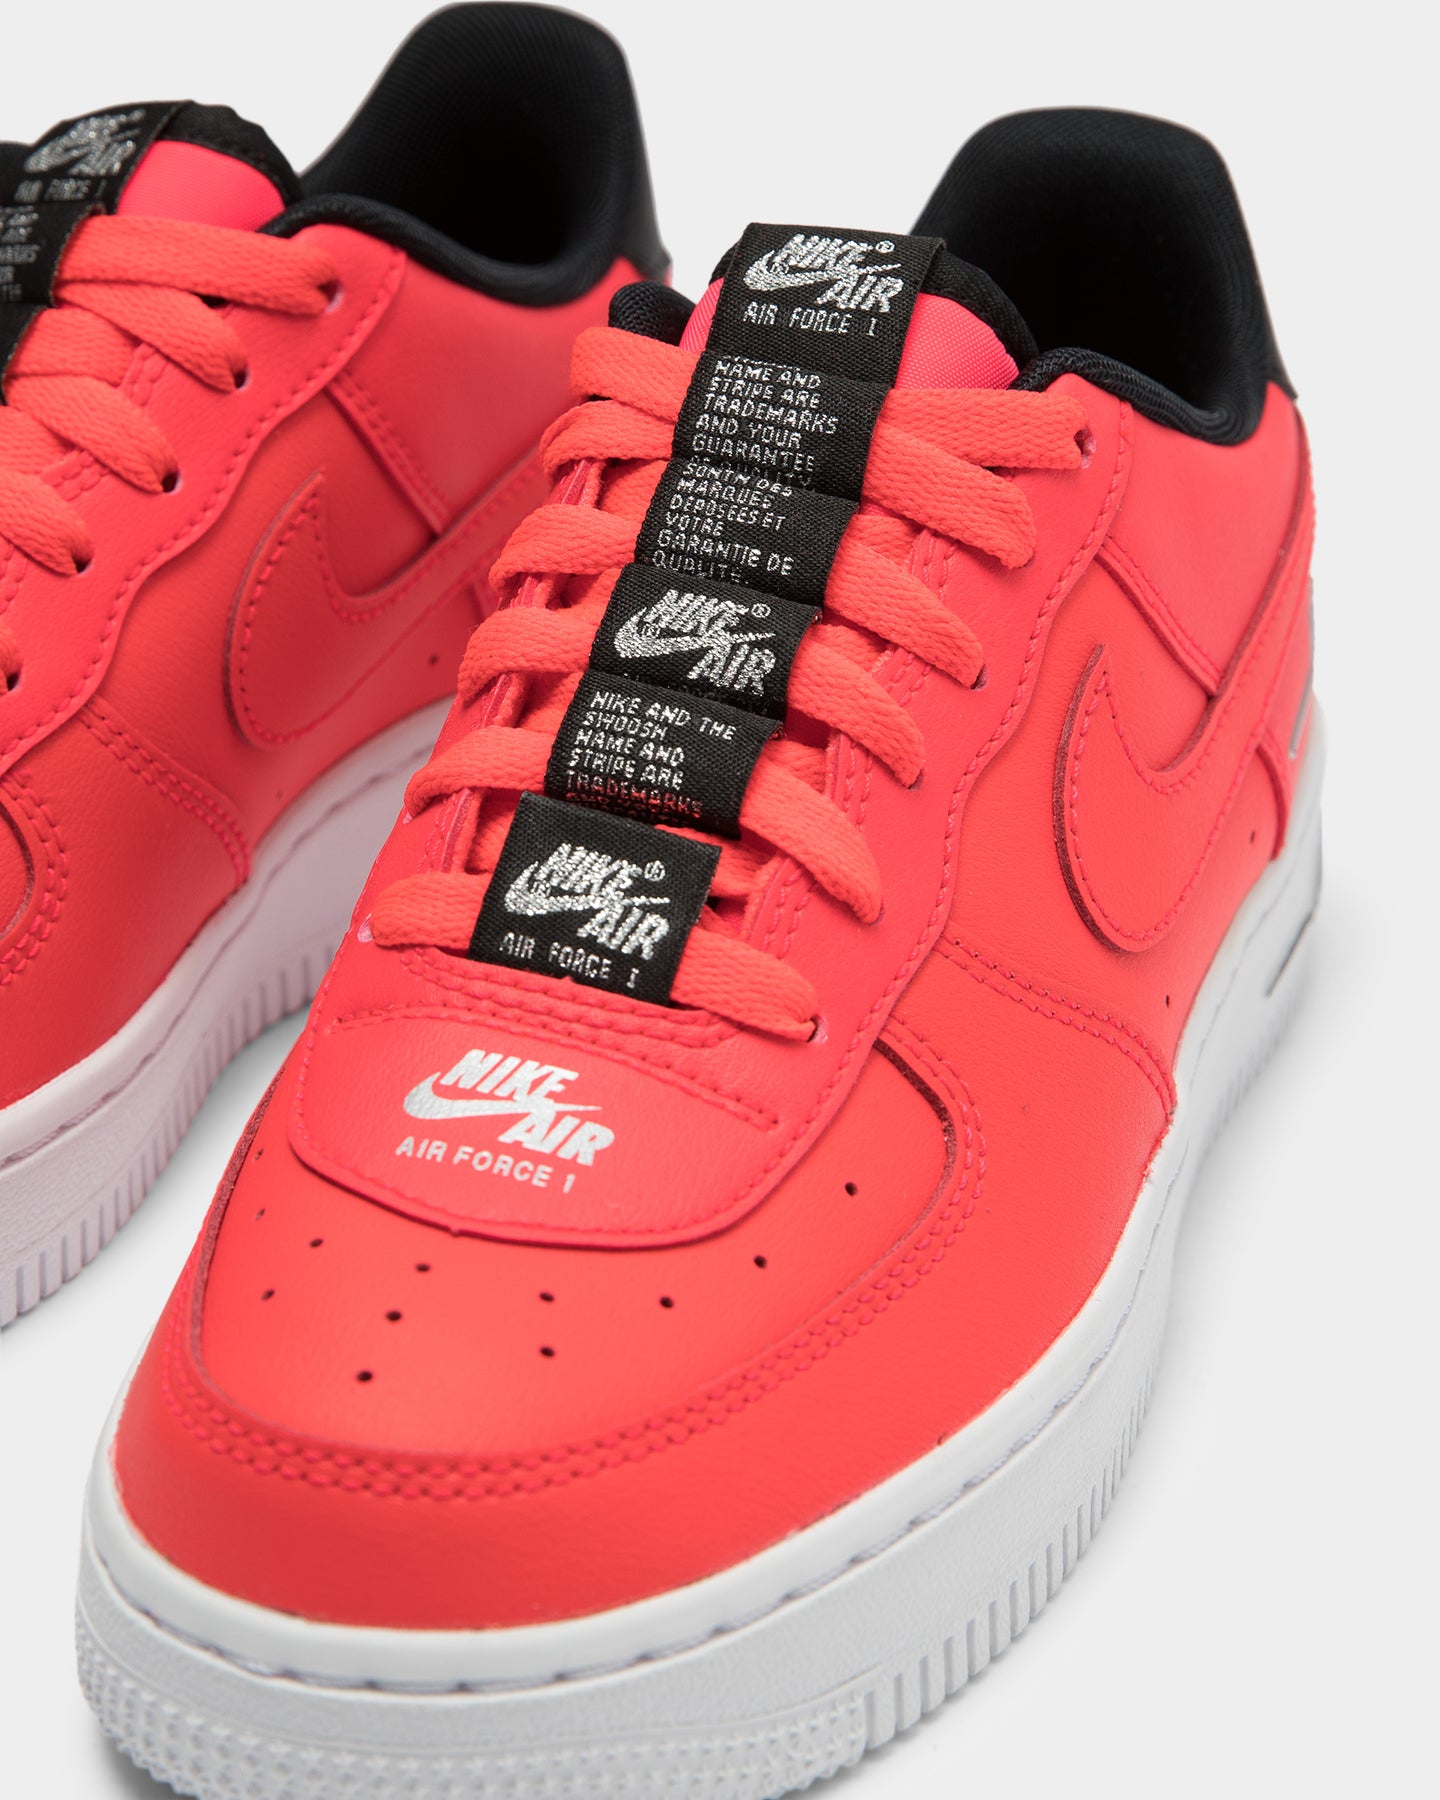 nike air force 1 lv8 1 double gs